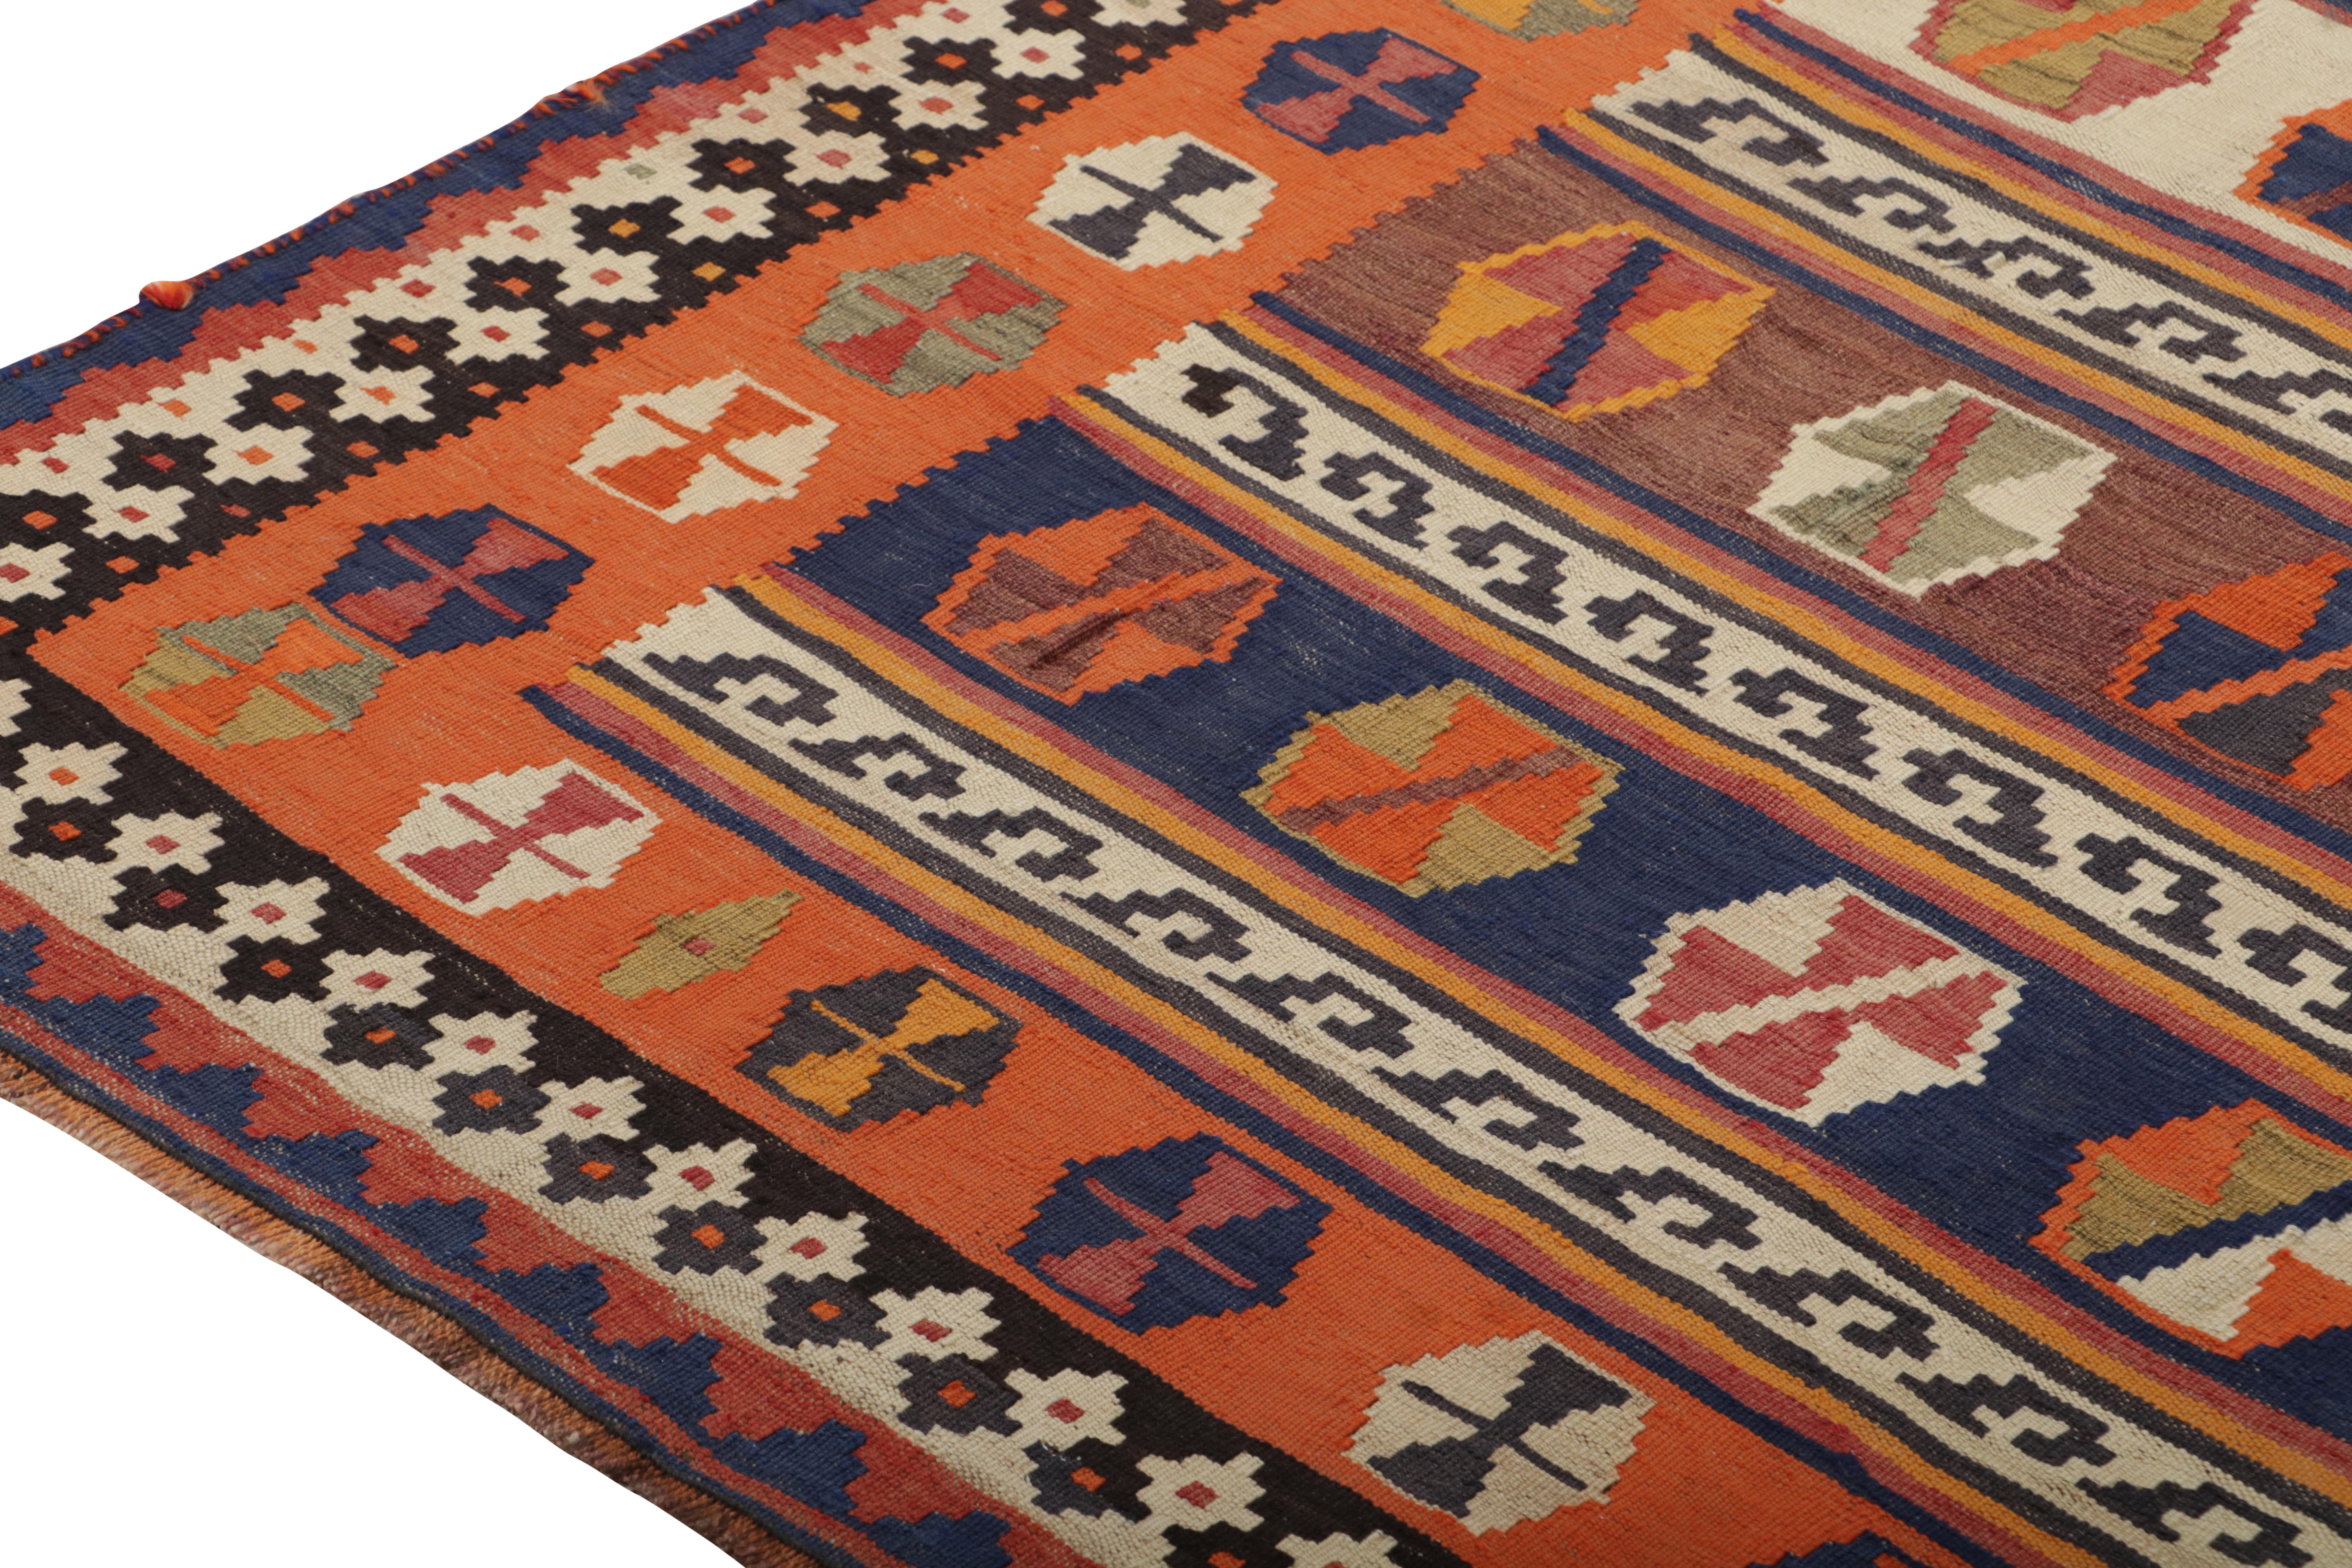 Vintage Qashqai Persian Kilim in Orange with Geometric Patterns In Good Condition For Sale In Long Island City, NY